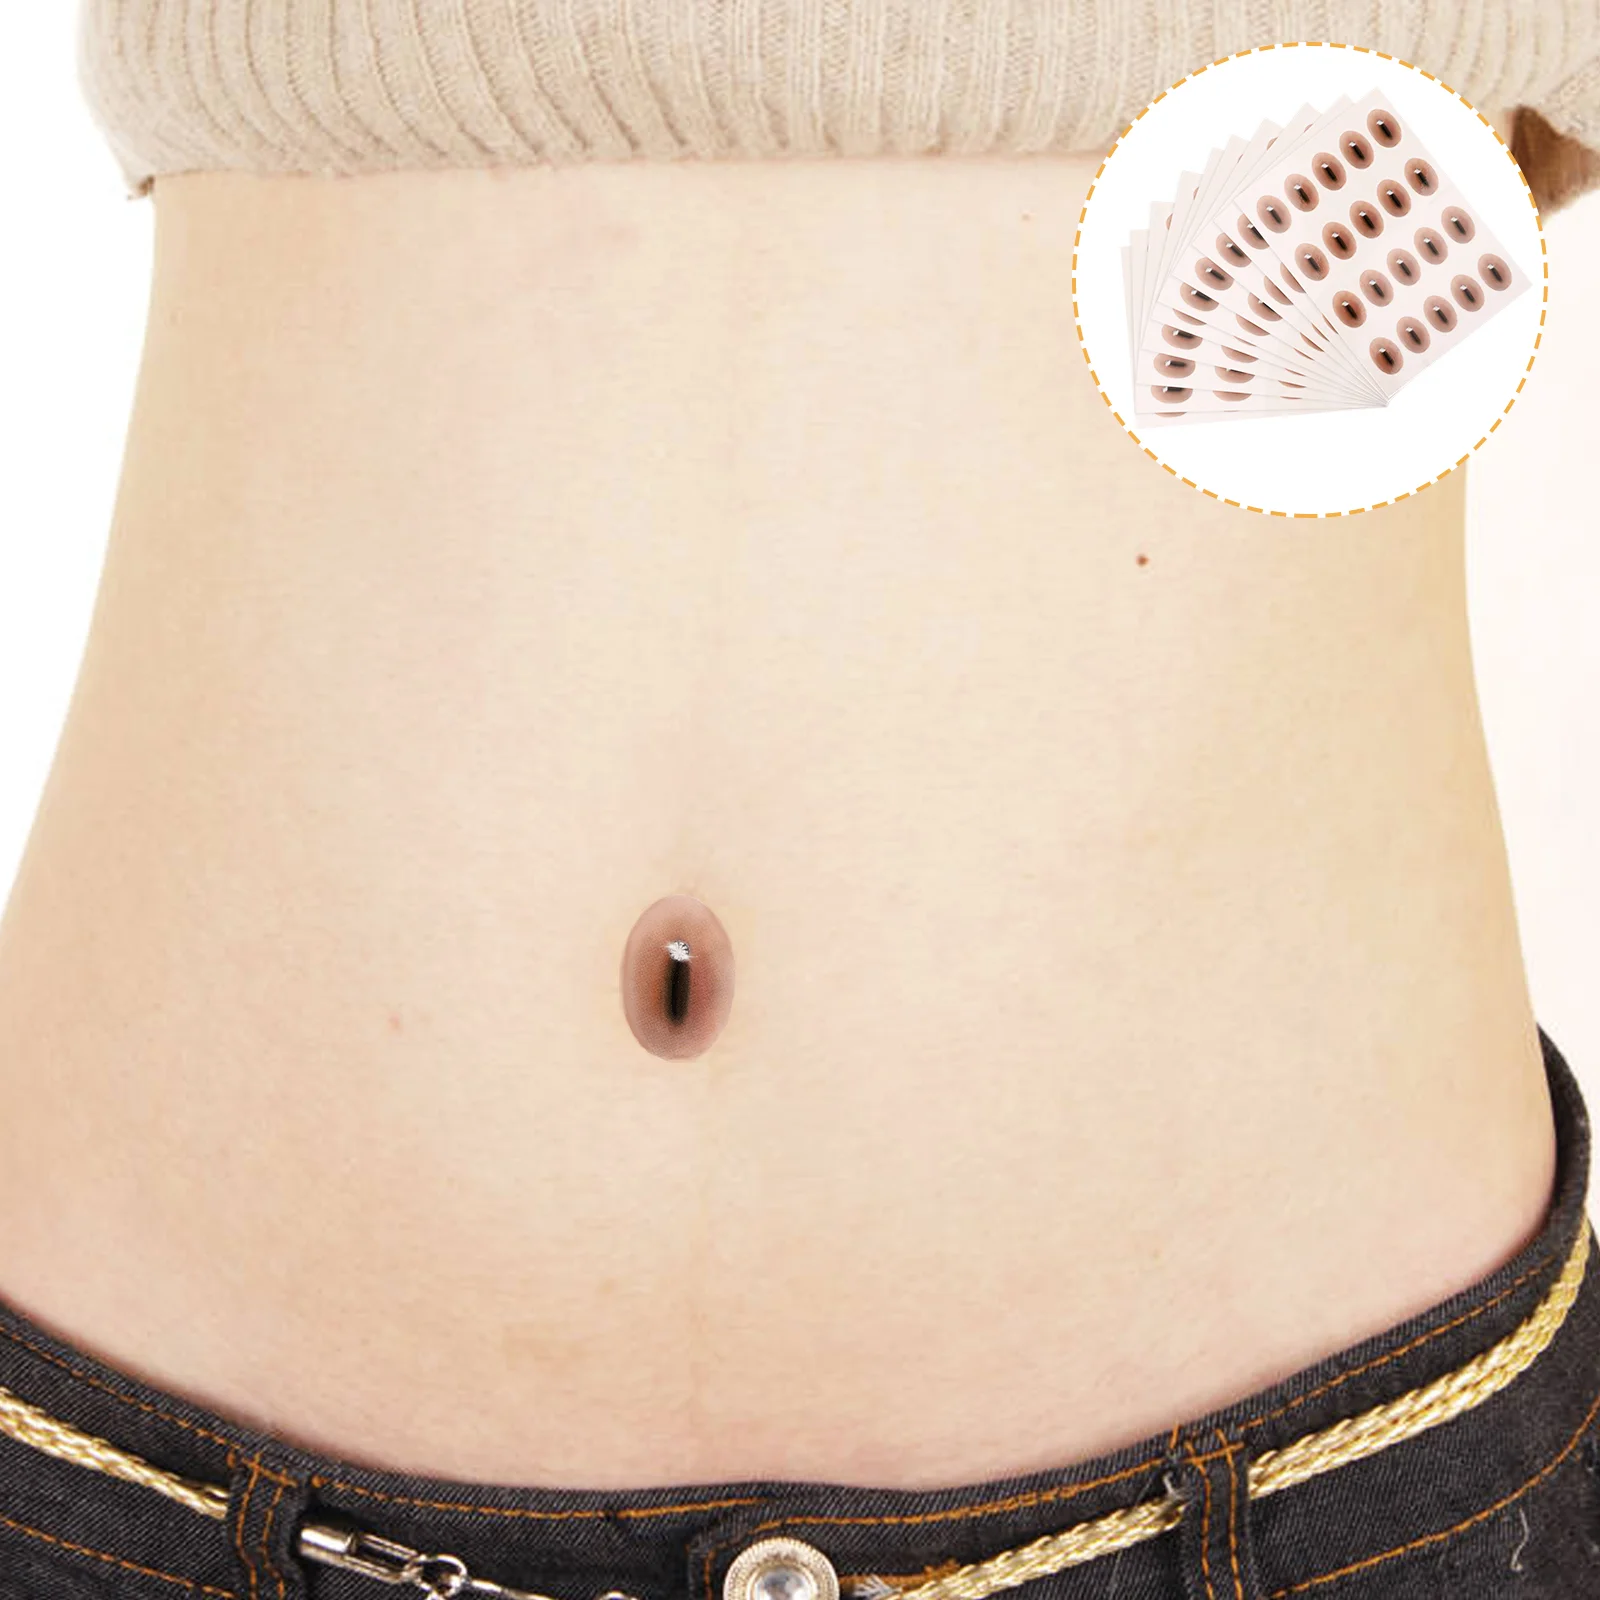 

10 Sheets Belly Button Tattoo Stickers Temporary Around Nail Fake Tattoos for Women Disposable